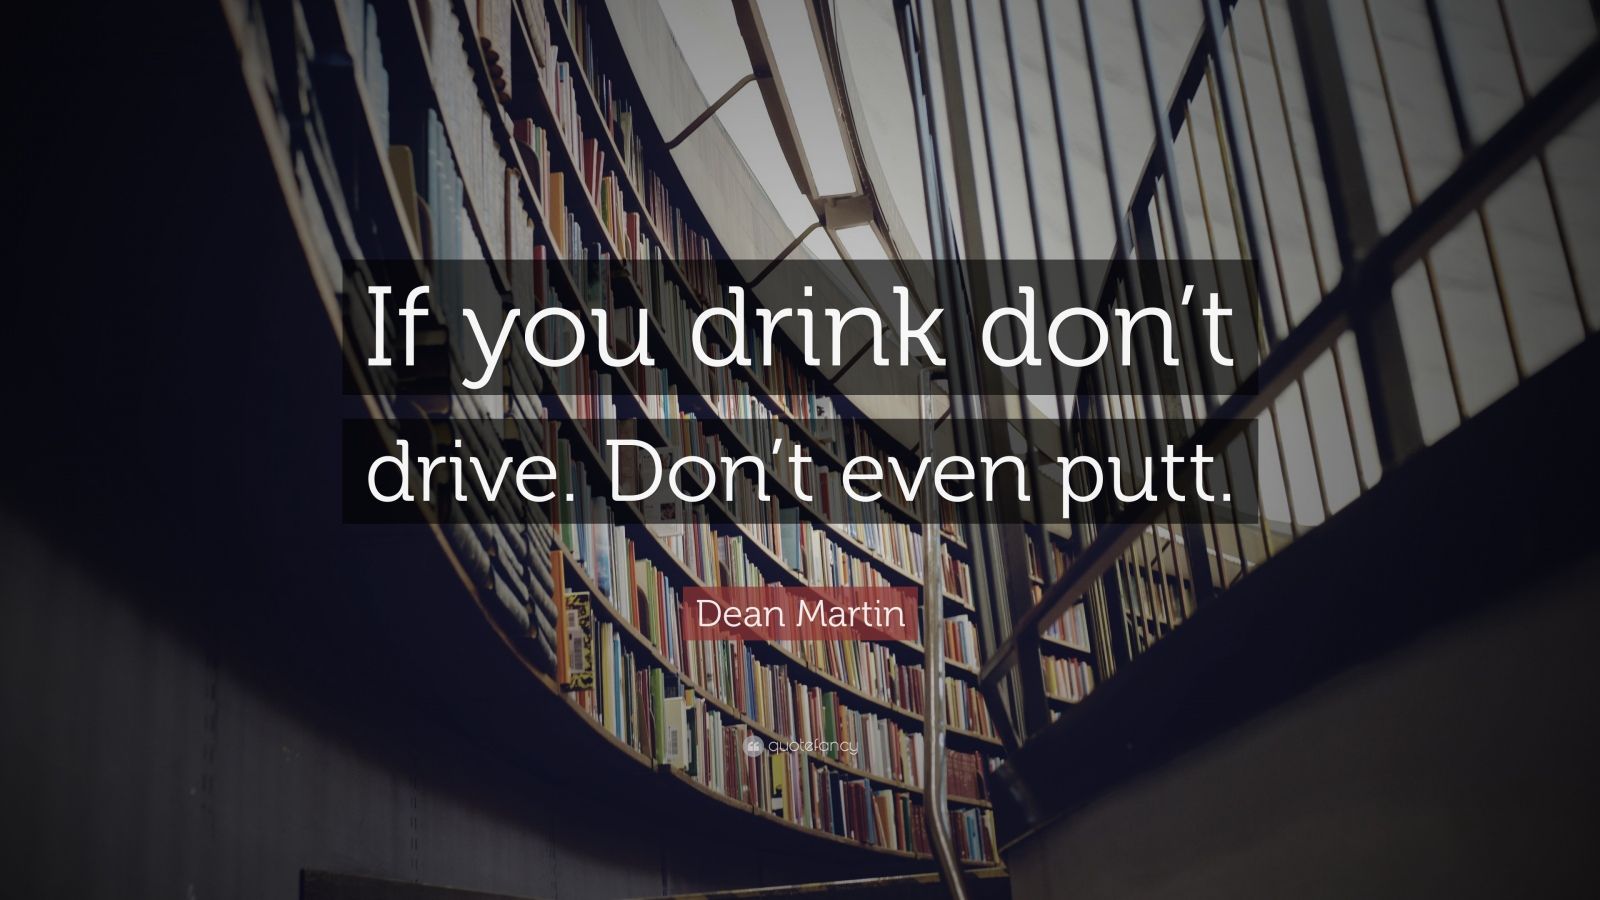 Dean Martin Quote: “If you drink don’t drive. Don’t even putt.”